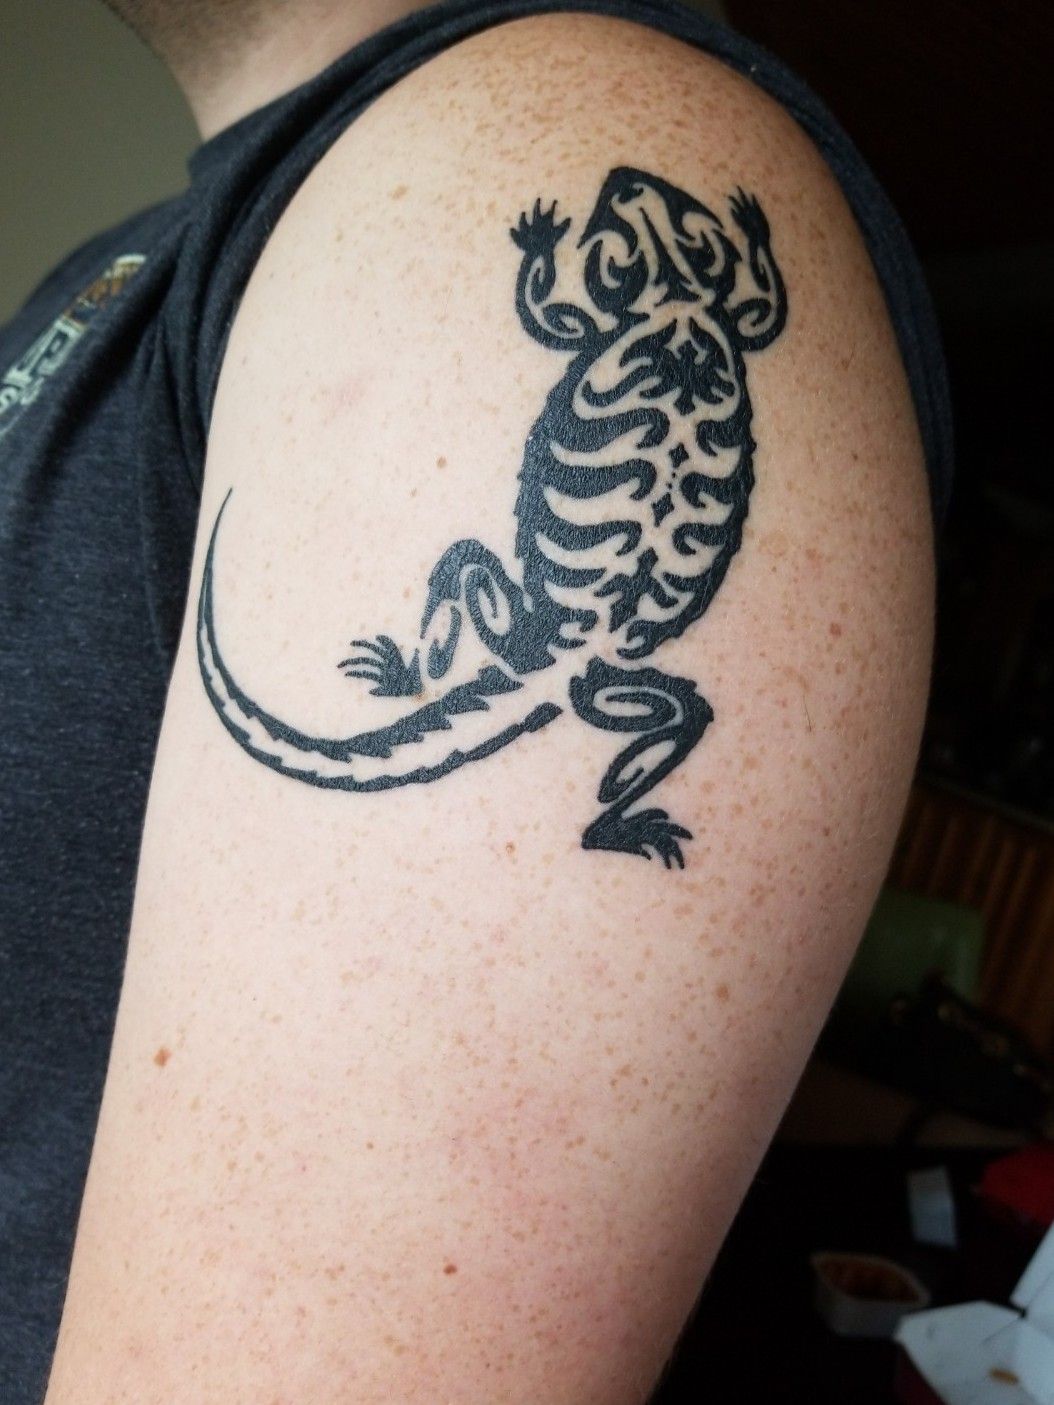 Simple tattoo inspired by my bearded dragon by Erik  Atomic Lotus in OKC   rtattoos